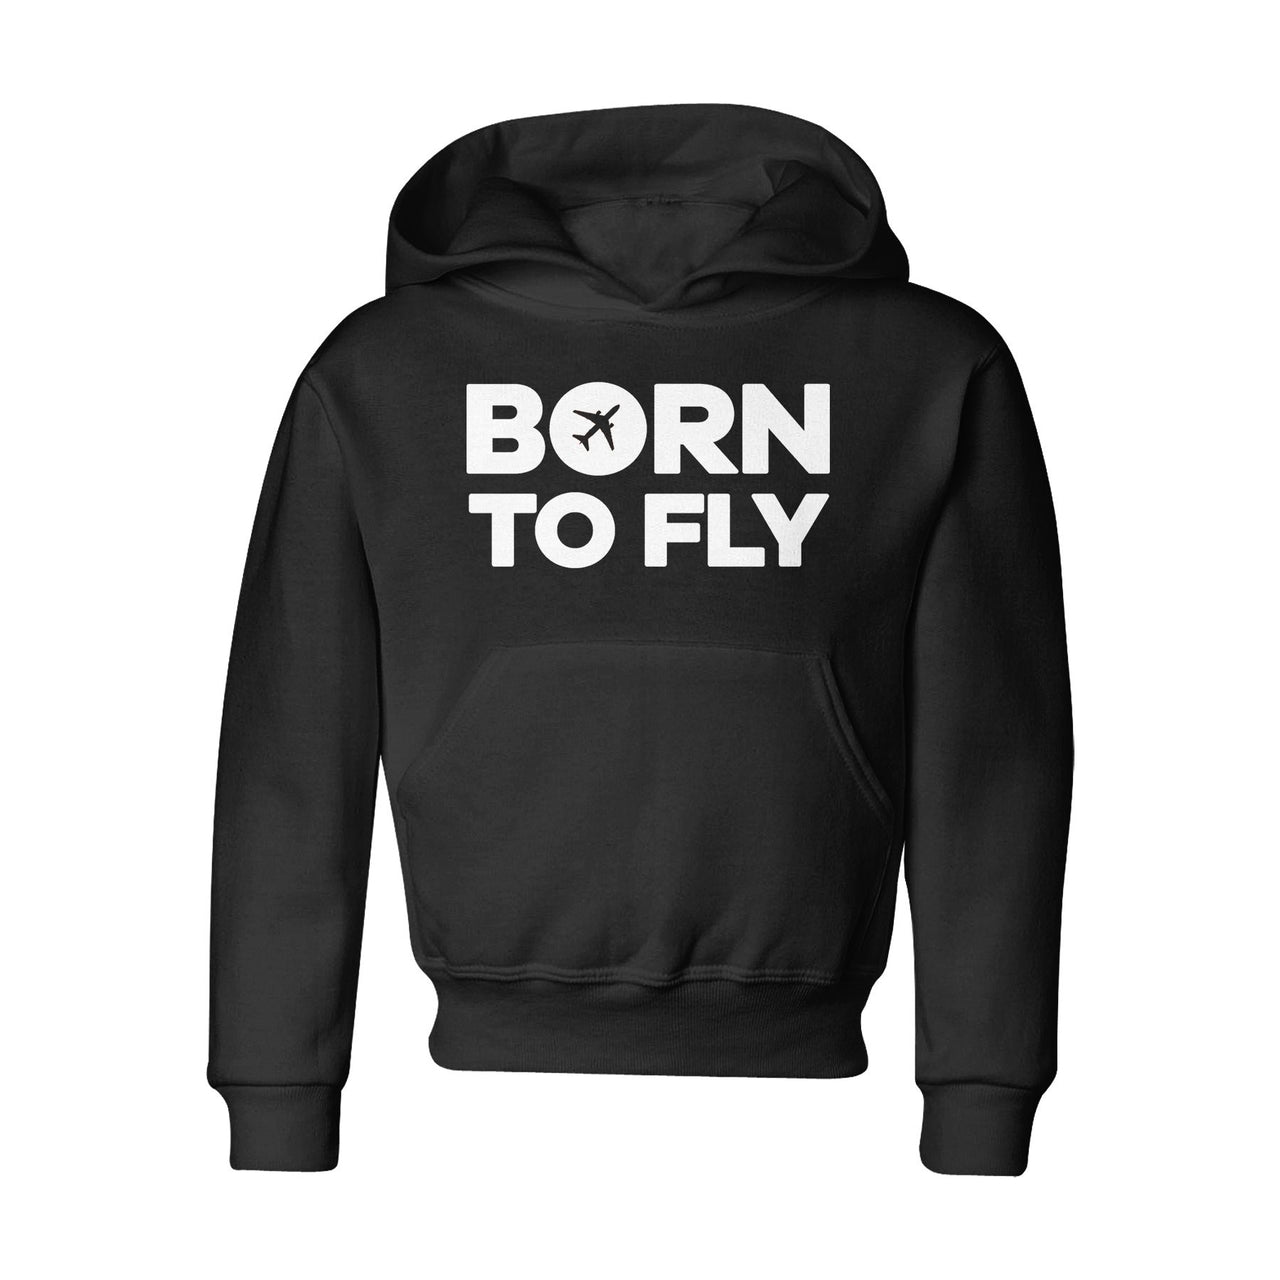 Born To Fly Special Designed "CHILDREN" Hoodies